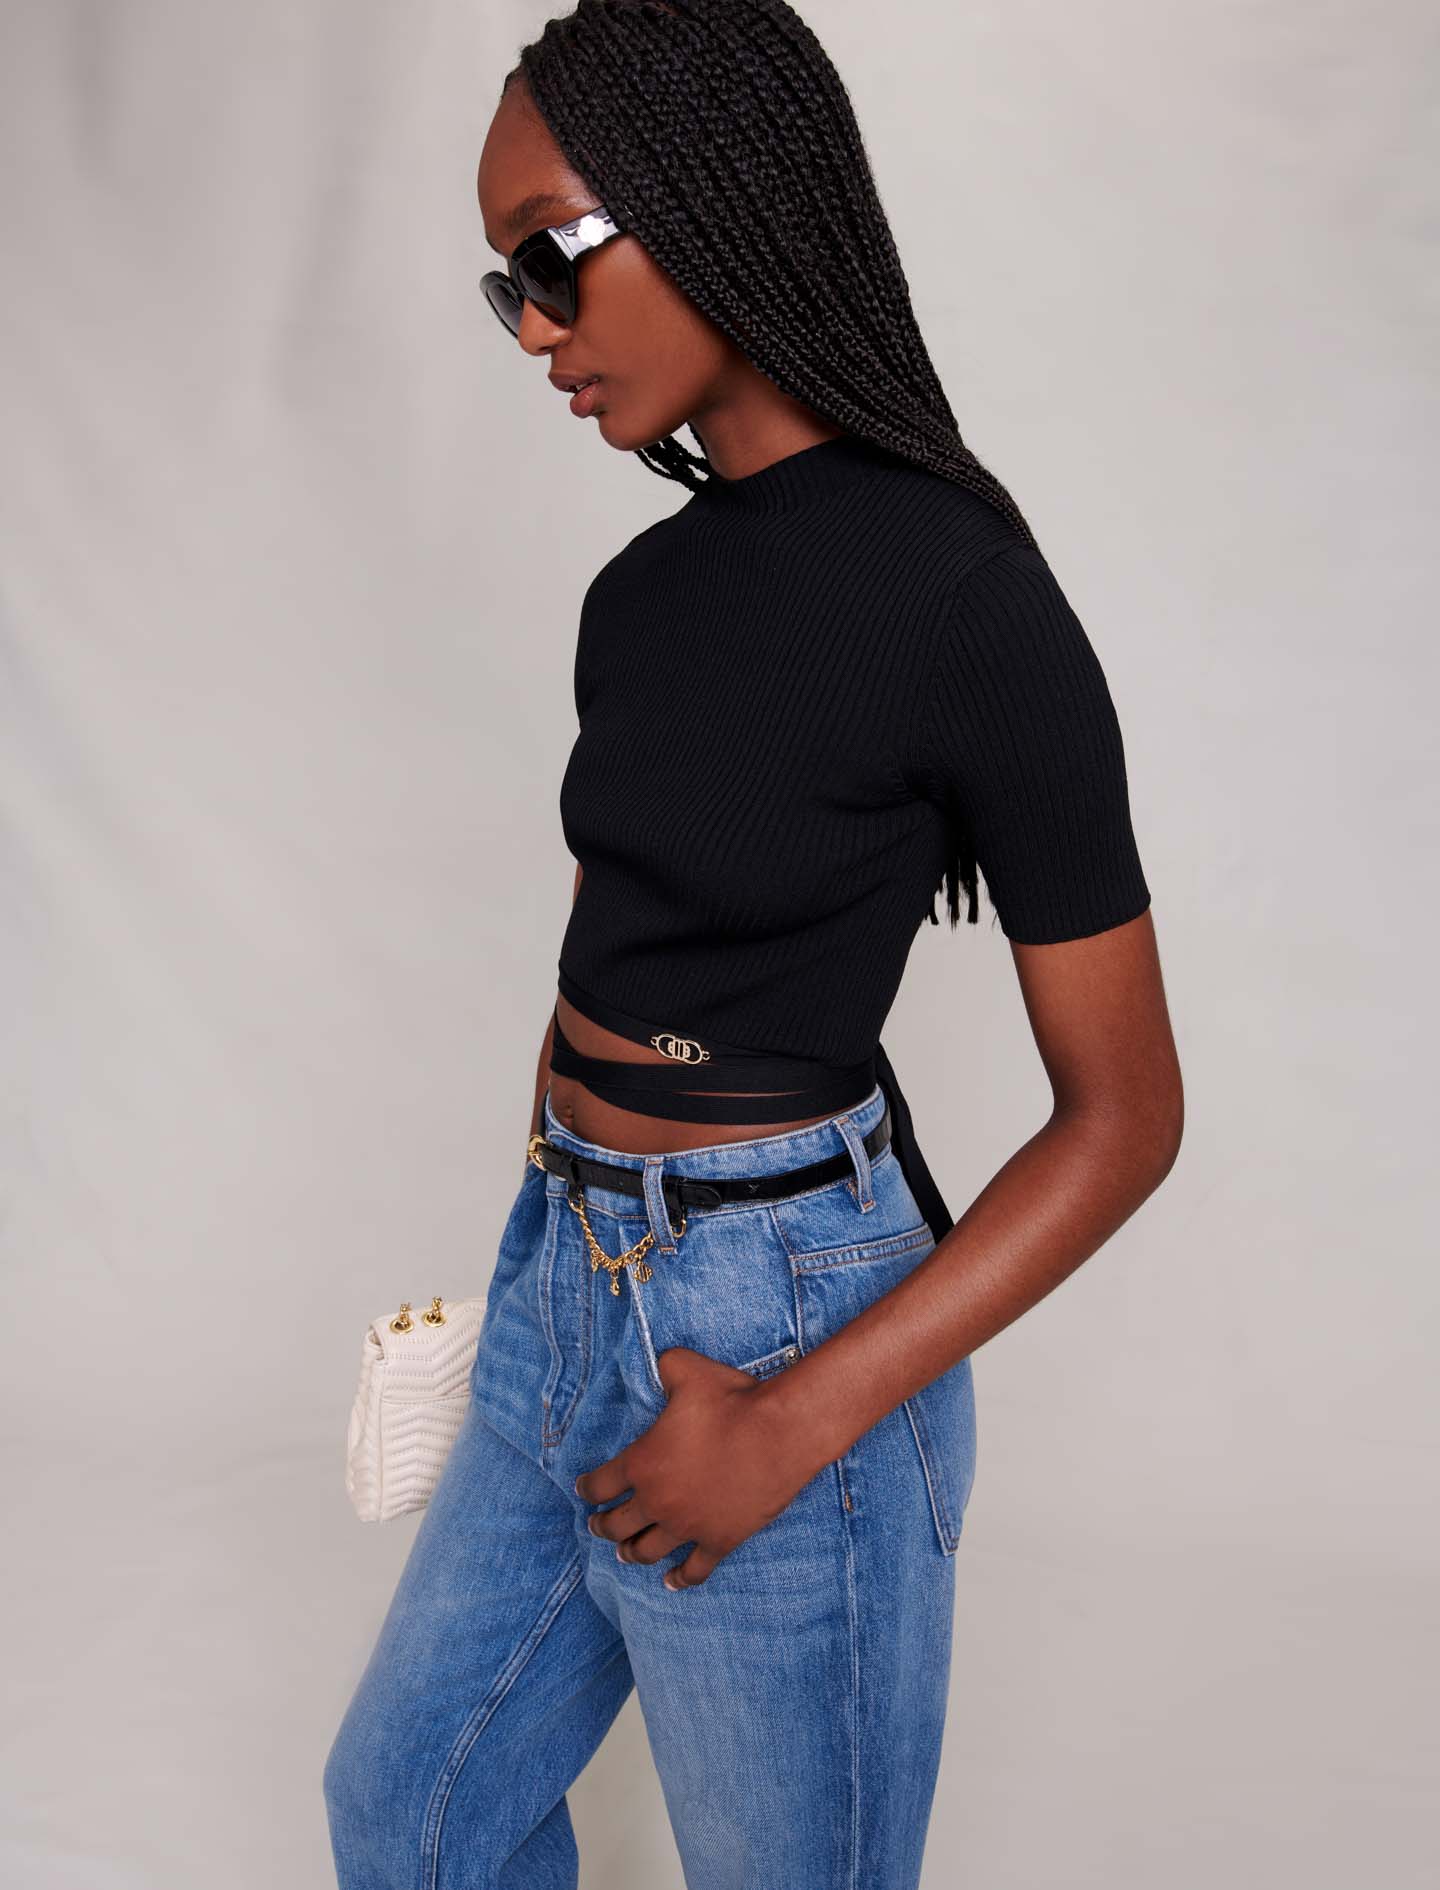 Criss crossed cropped top - Black